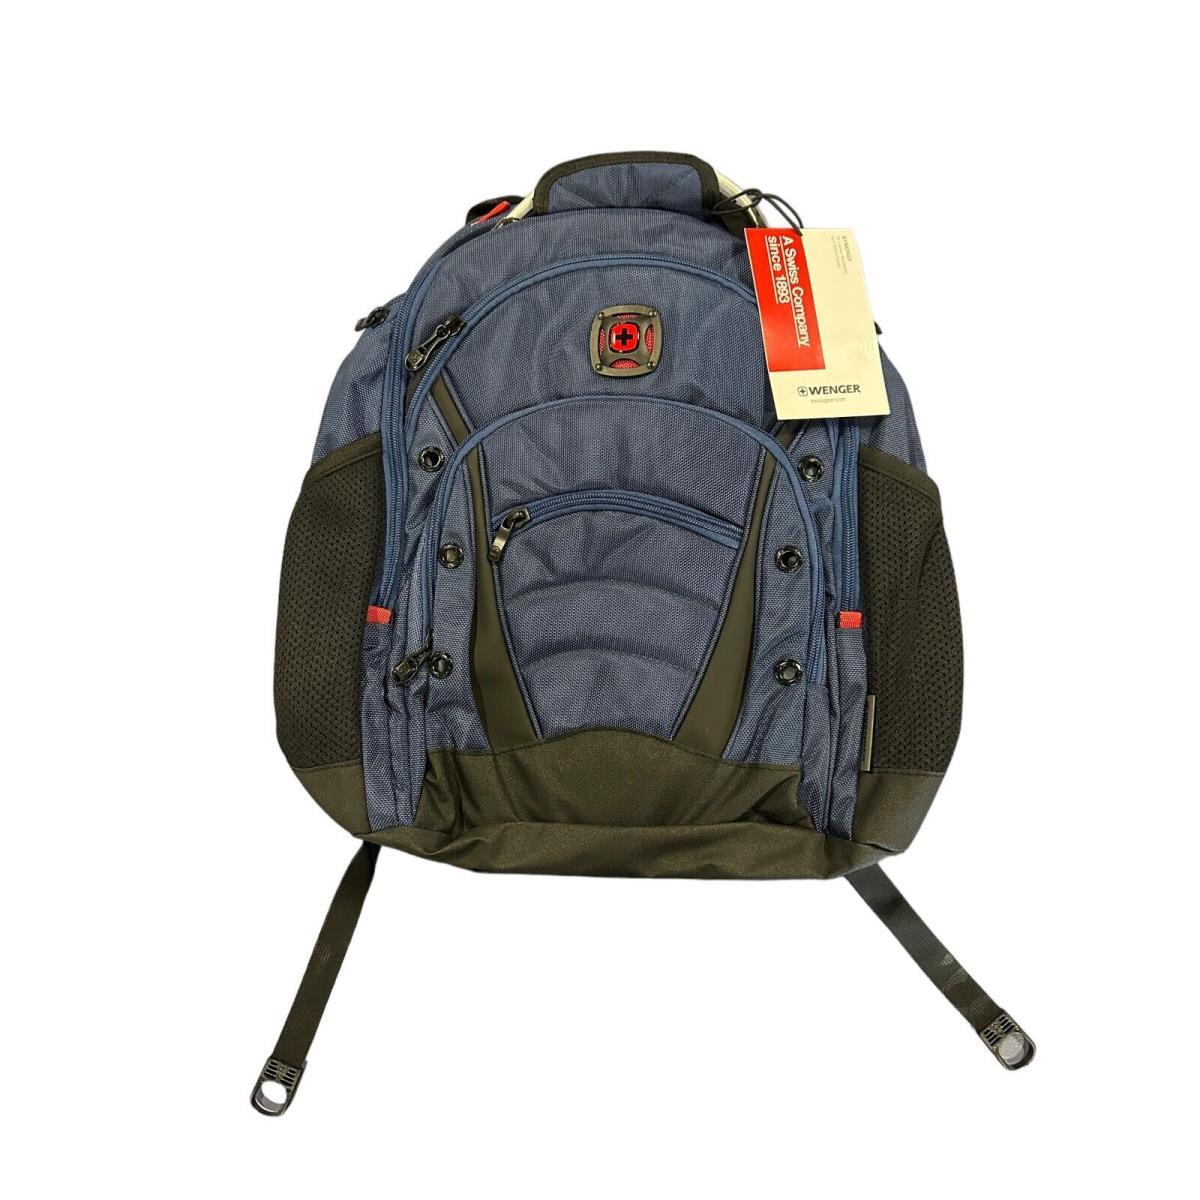 Swiss Army Wenger Synergy 16 Inch Laptop Backpack - Blue/black